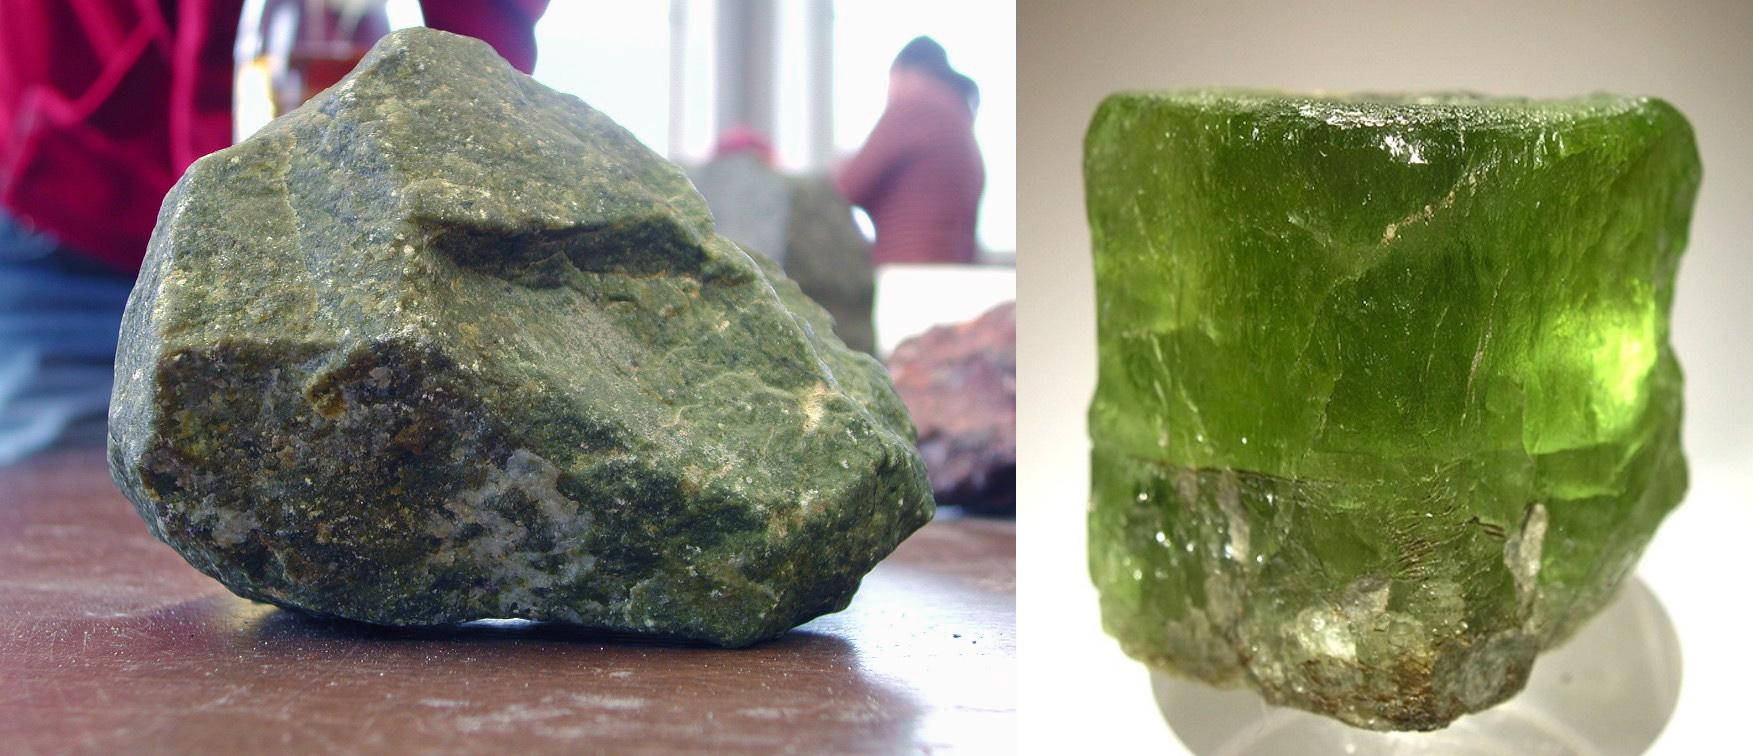 A peridotite rock on the left, the mineral olivine on right. Olivine reacts with CO2 from air in a natural process. (Photo: דקי)